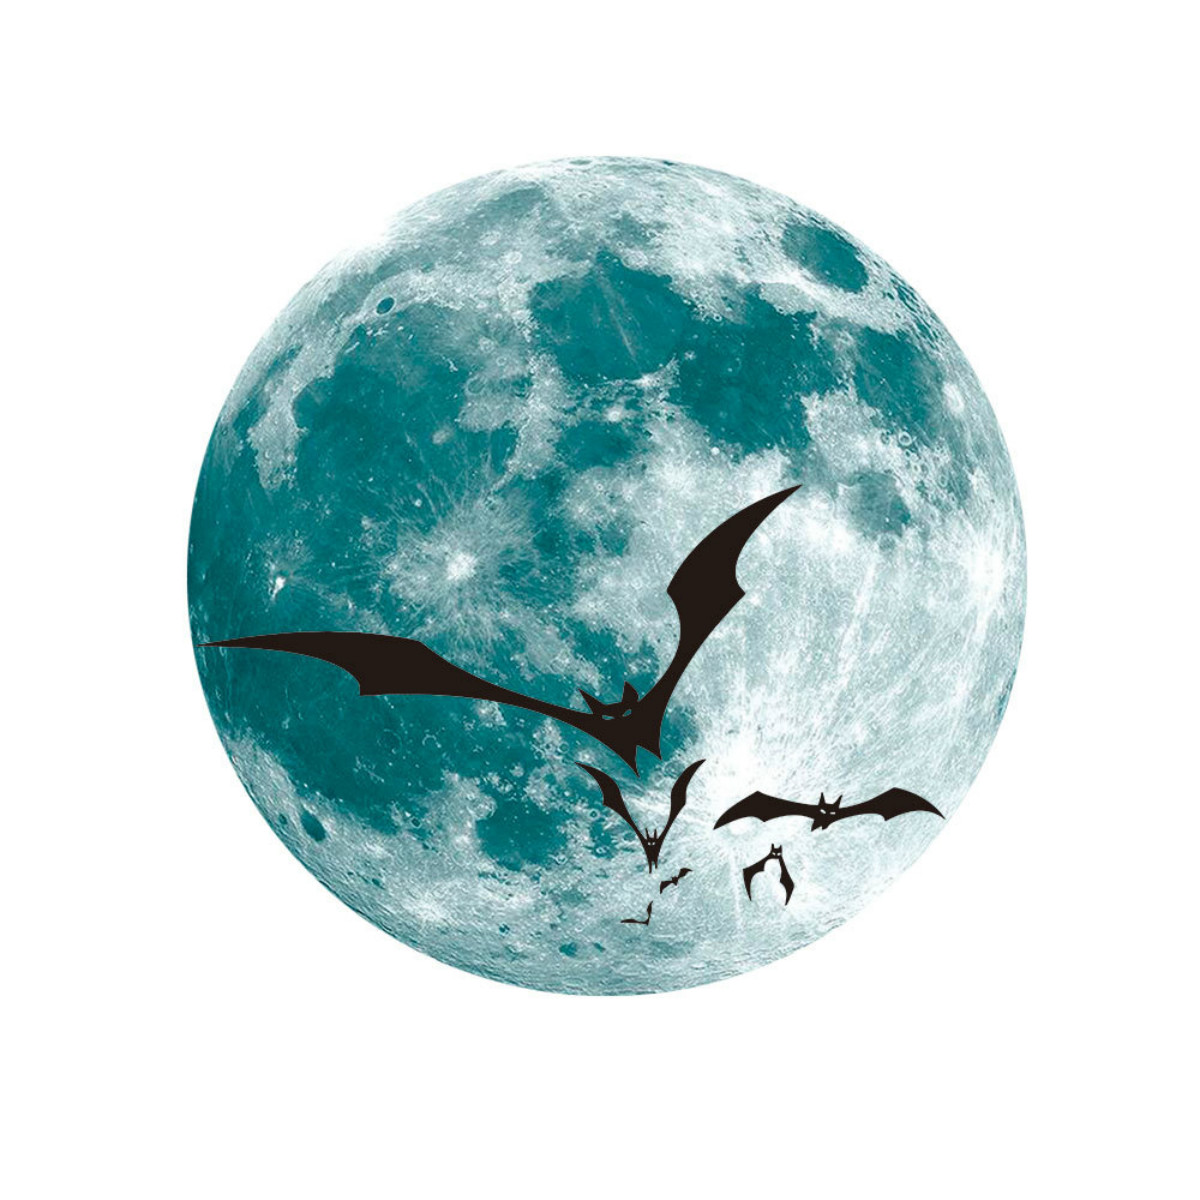 Halloween-Moon-Bat-Glow-In-Dark-Wall-Sticker-Luminous-Removable-Party-Room-Decorations-1585181-8